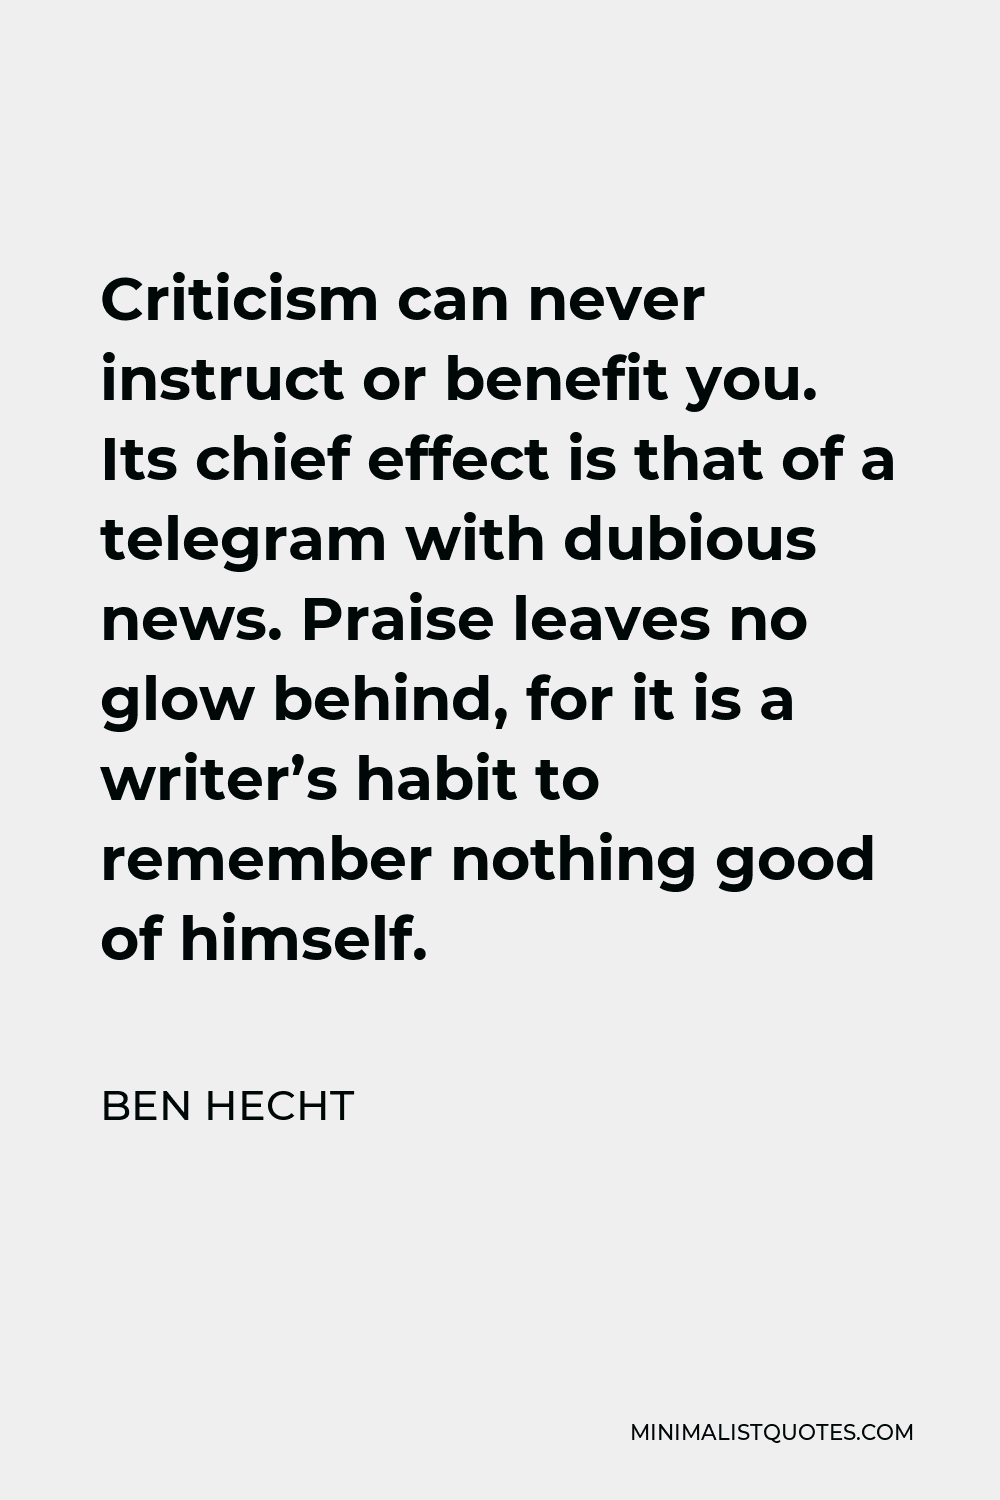 Ben Hecht Quote - Criticism can never instruct or benefit you. Its chief effect is that of a telegram with dubious news. Praise leaves no glow behind, for it is a writer’s habit to remember nothing good of himself.